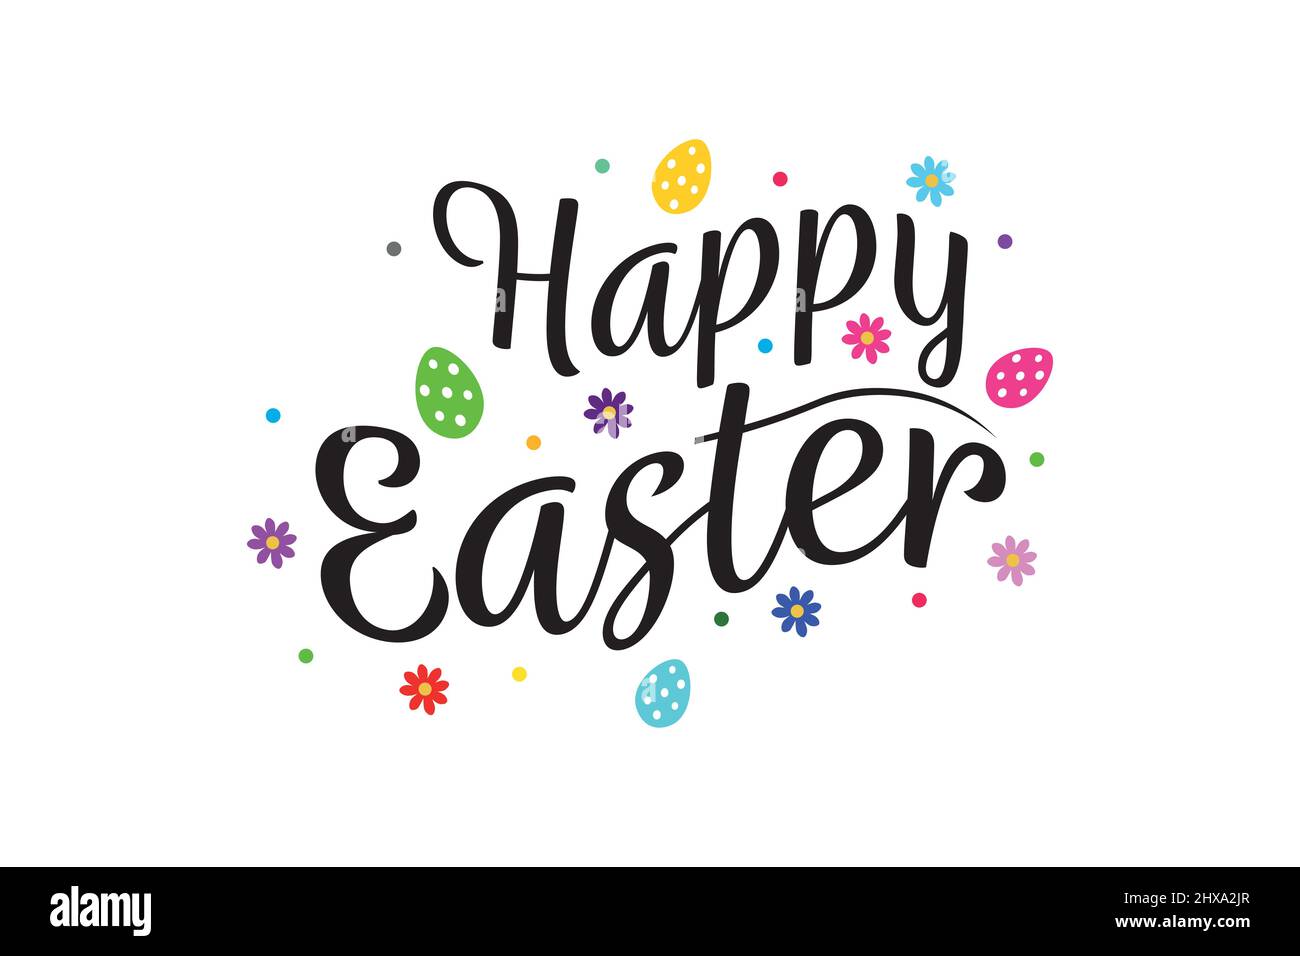 Happy Easter - Eggs, flowers, dots and text Stock Vector